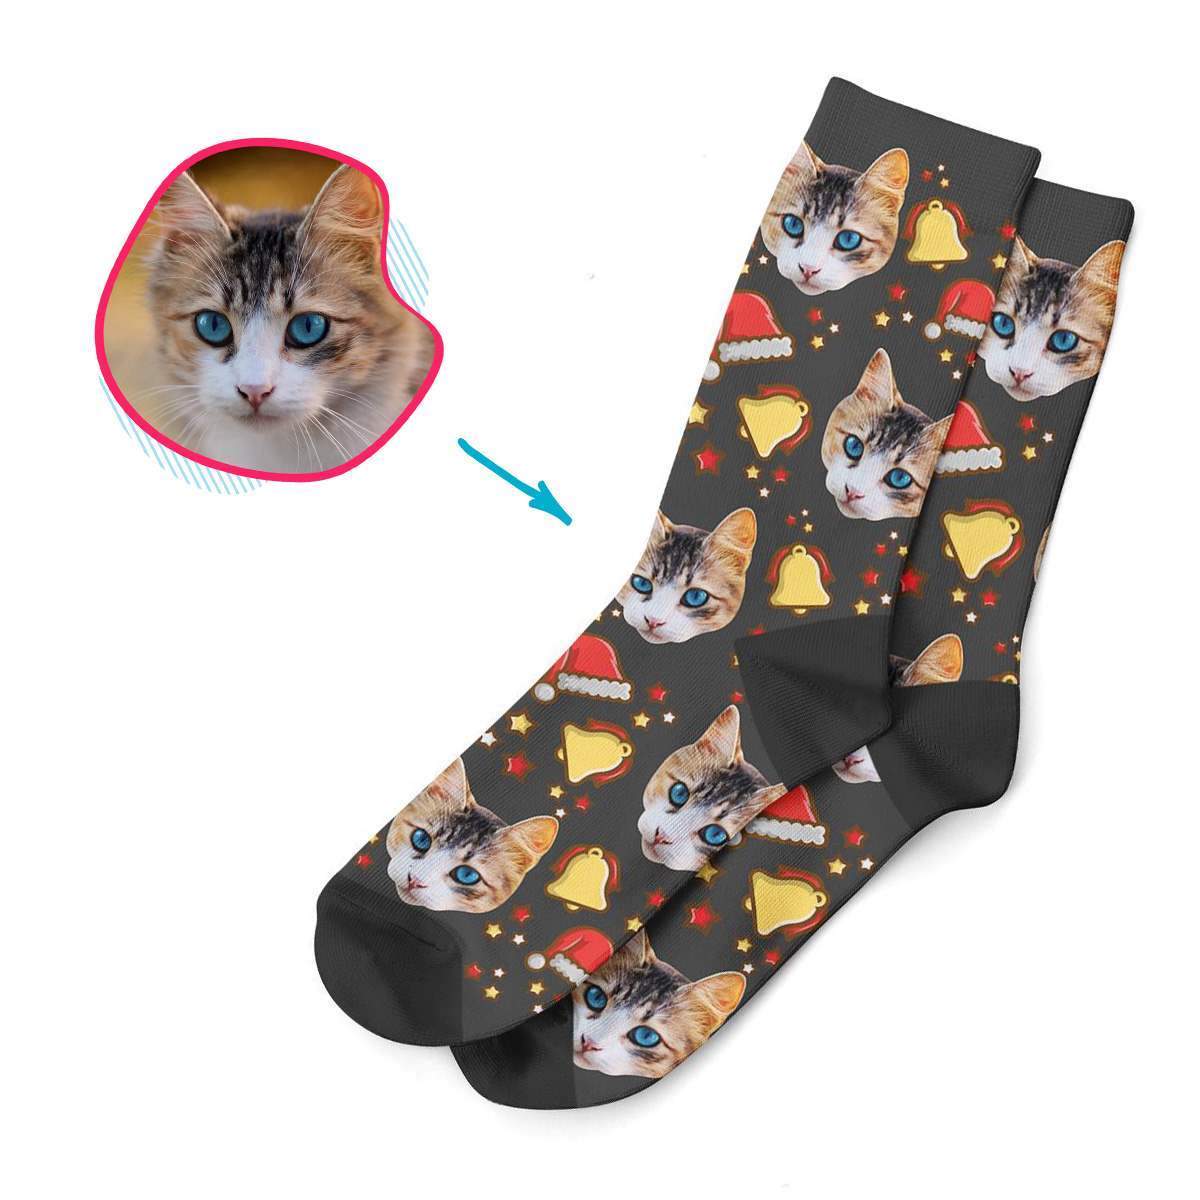 dark Santa's Hat socks personalized with photo of face printed on them